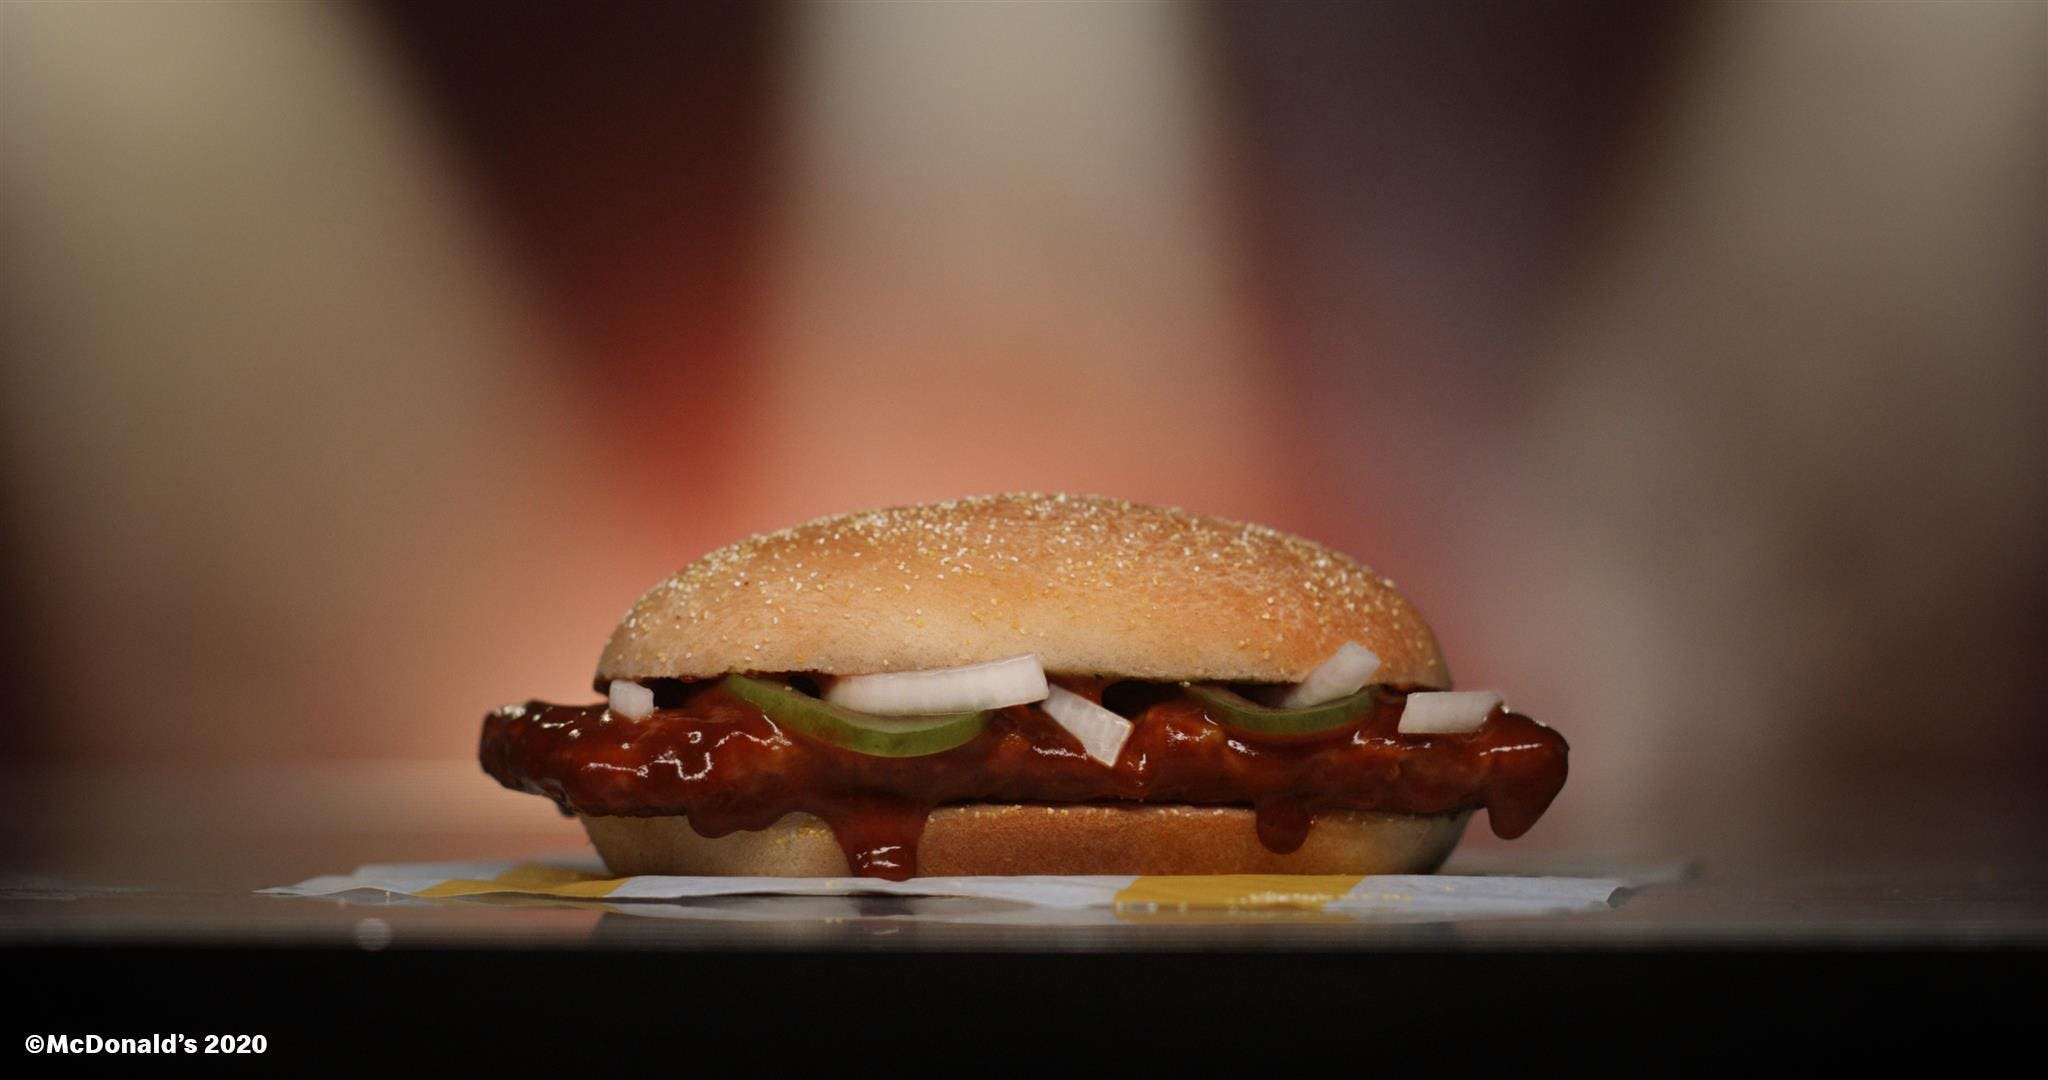 The McRib and Chipotle carne asada: Here are the 10 most-missed discontinued fast food items